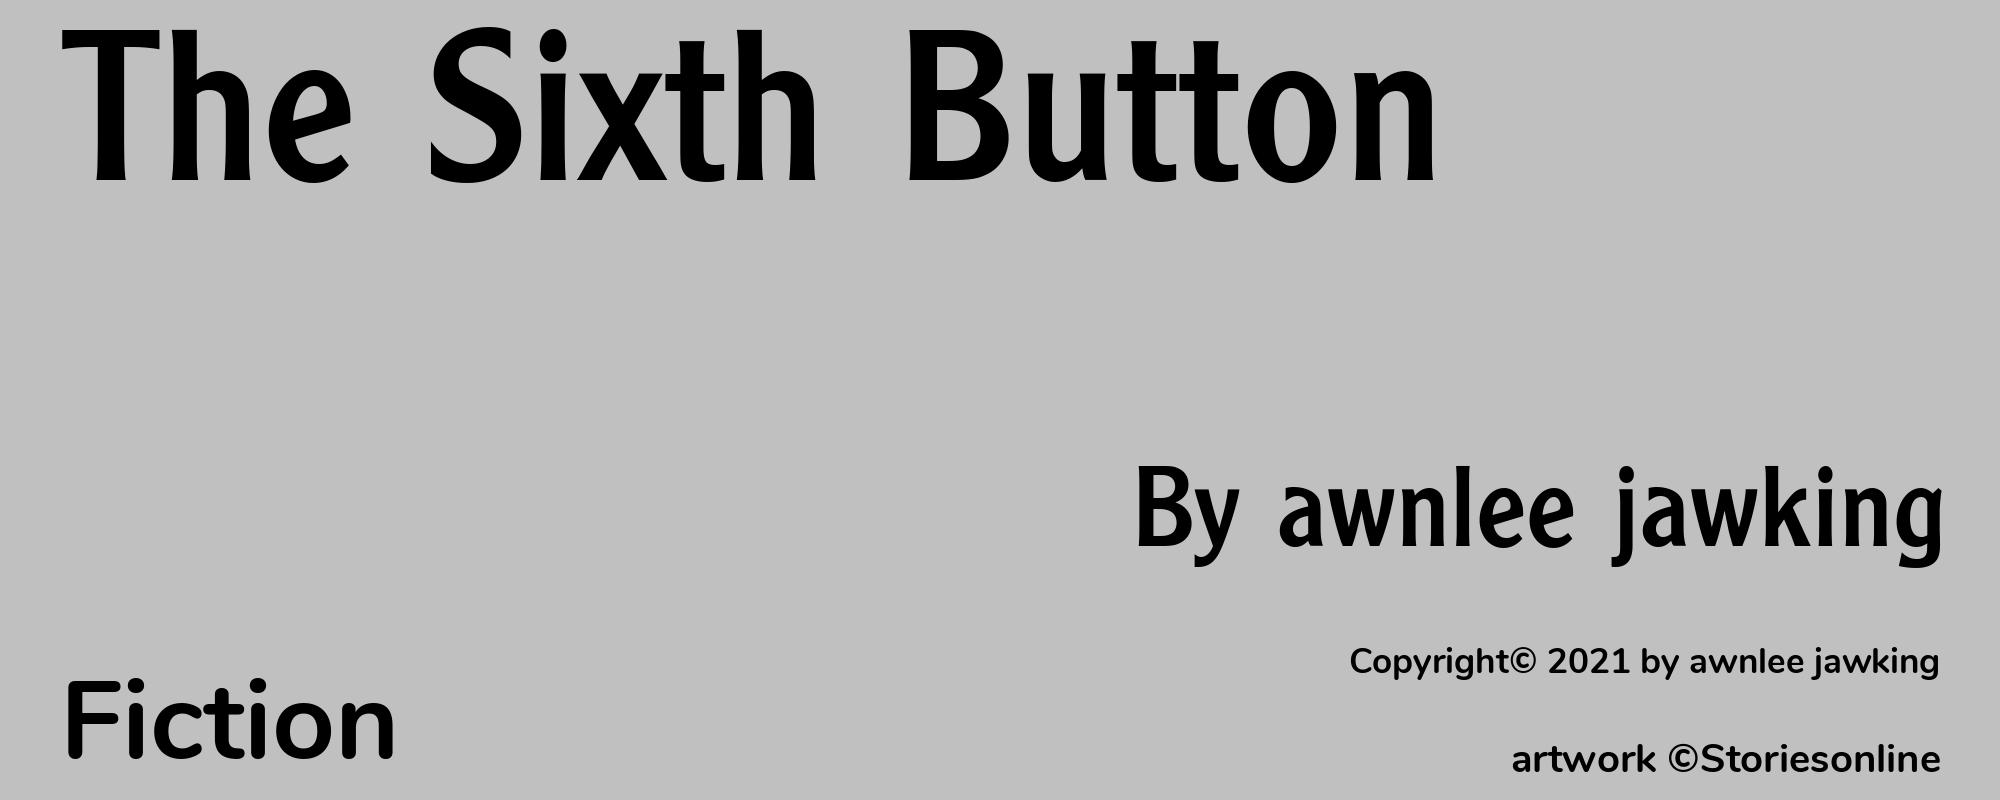 The Sixth Button - Cover